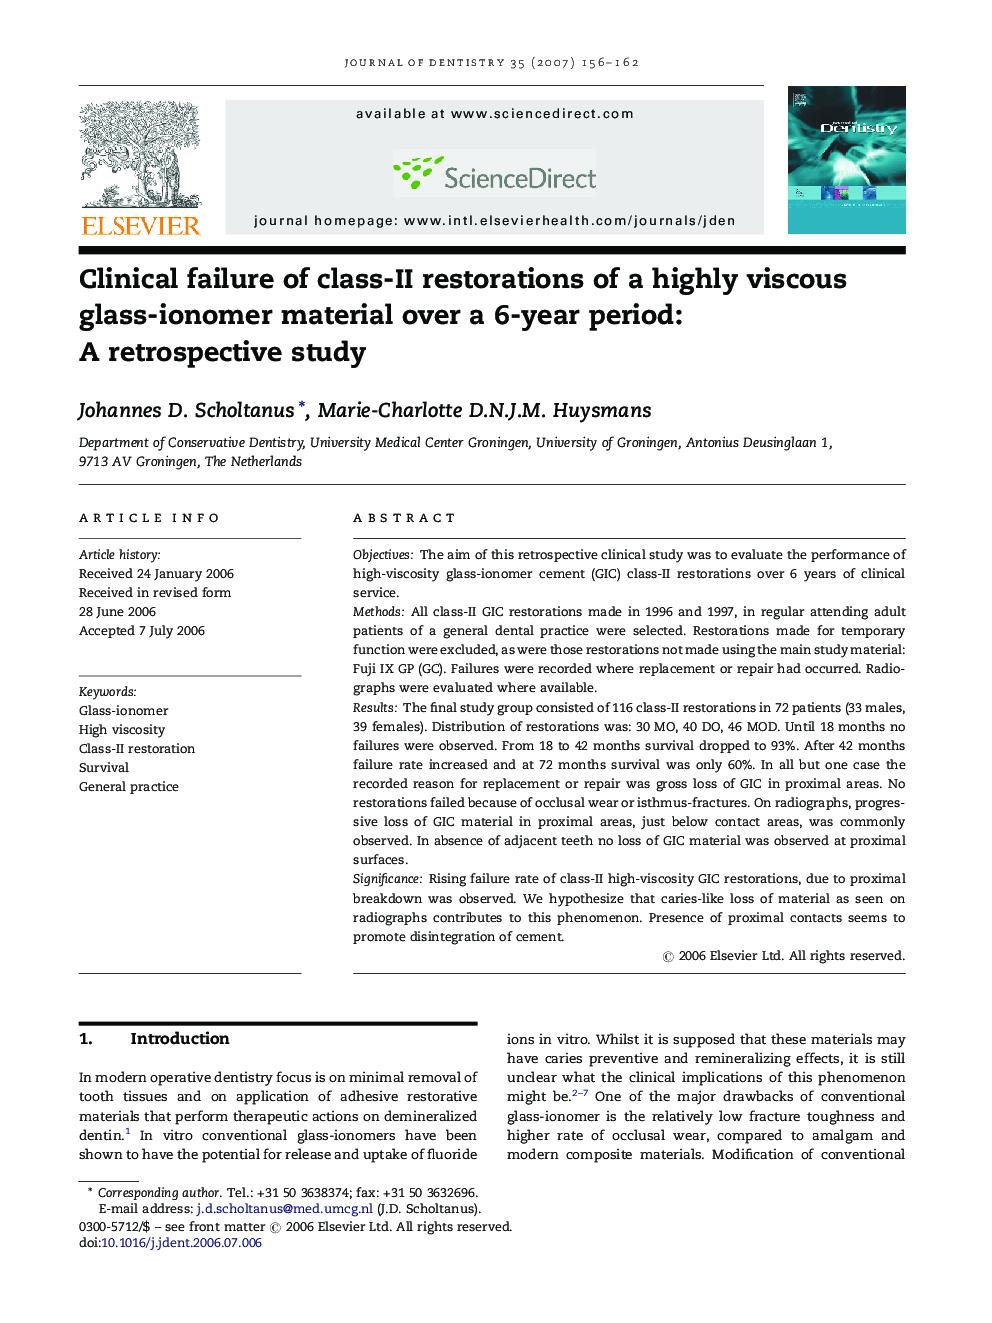 Clinical failure of class-II restorations of a highly viscous glass-ionomer material over a 6-year period: A retrospective study